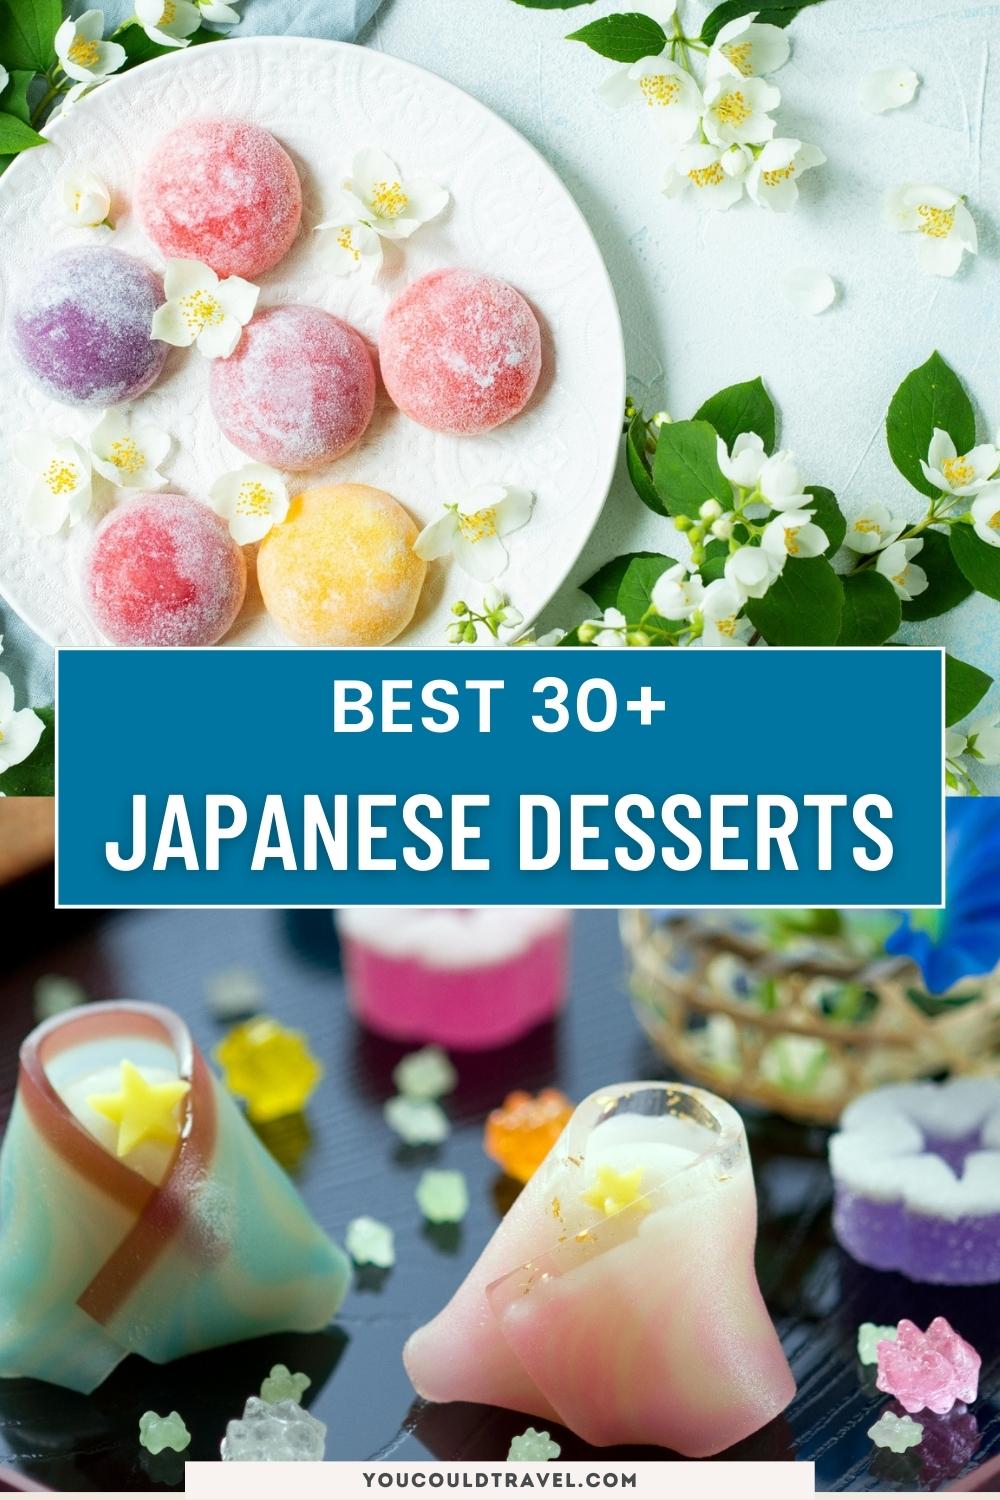 Over 30+ Japanese desserts to try